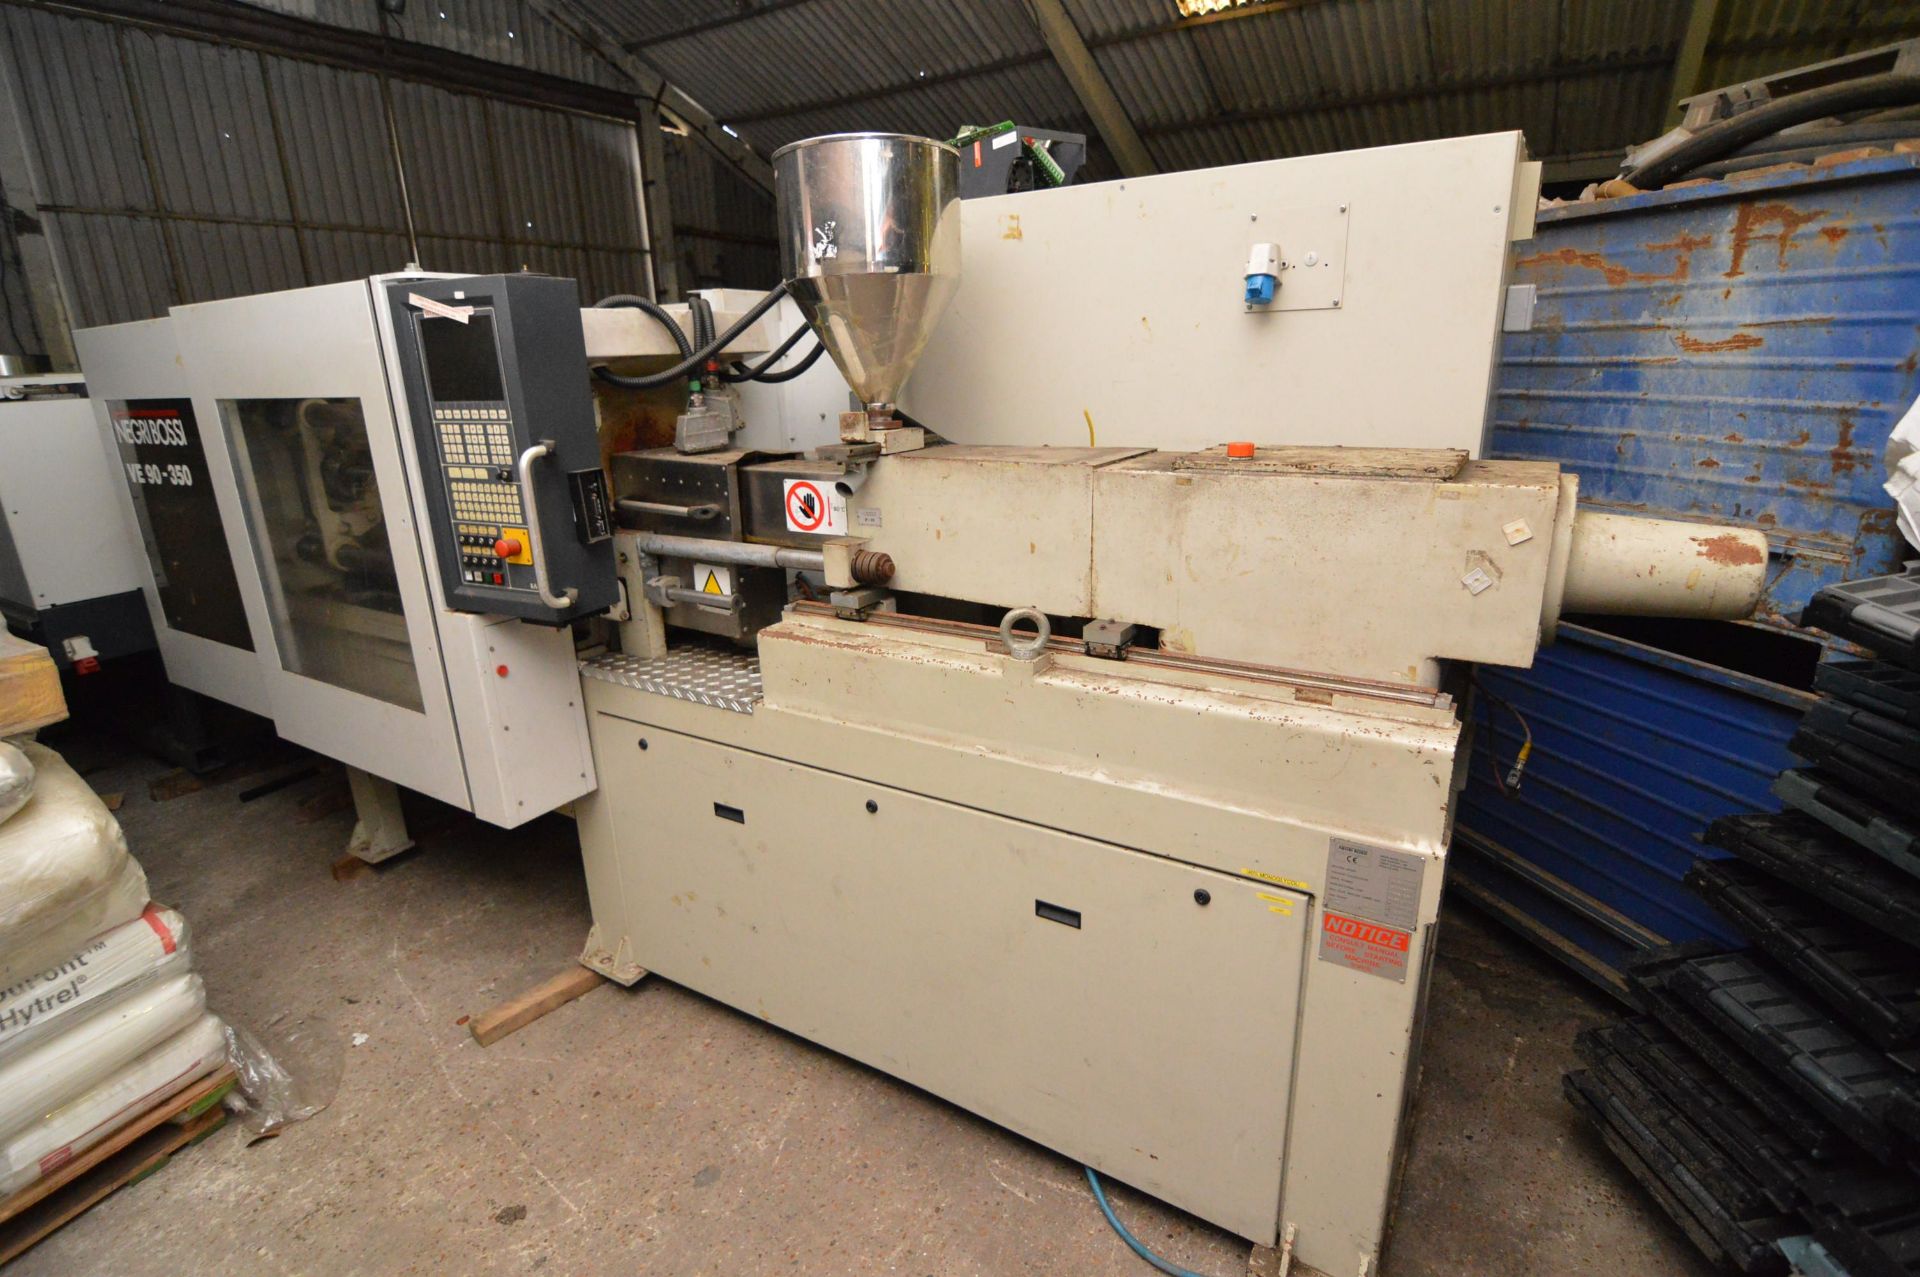 Negri Bossi VE90 90 tonne PLASTIC INJECTION MOULDING MACHINE, serial no. 88-125, euromap - Image 3 of 5